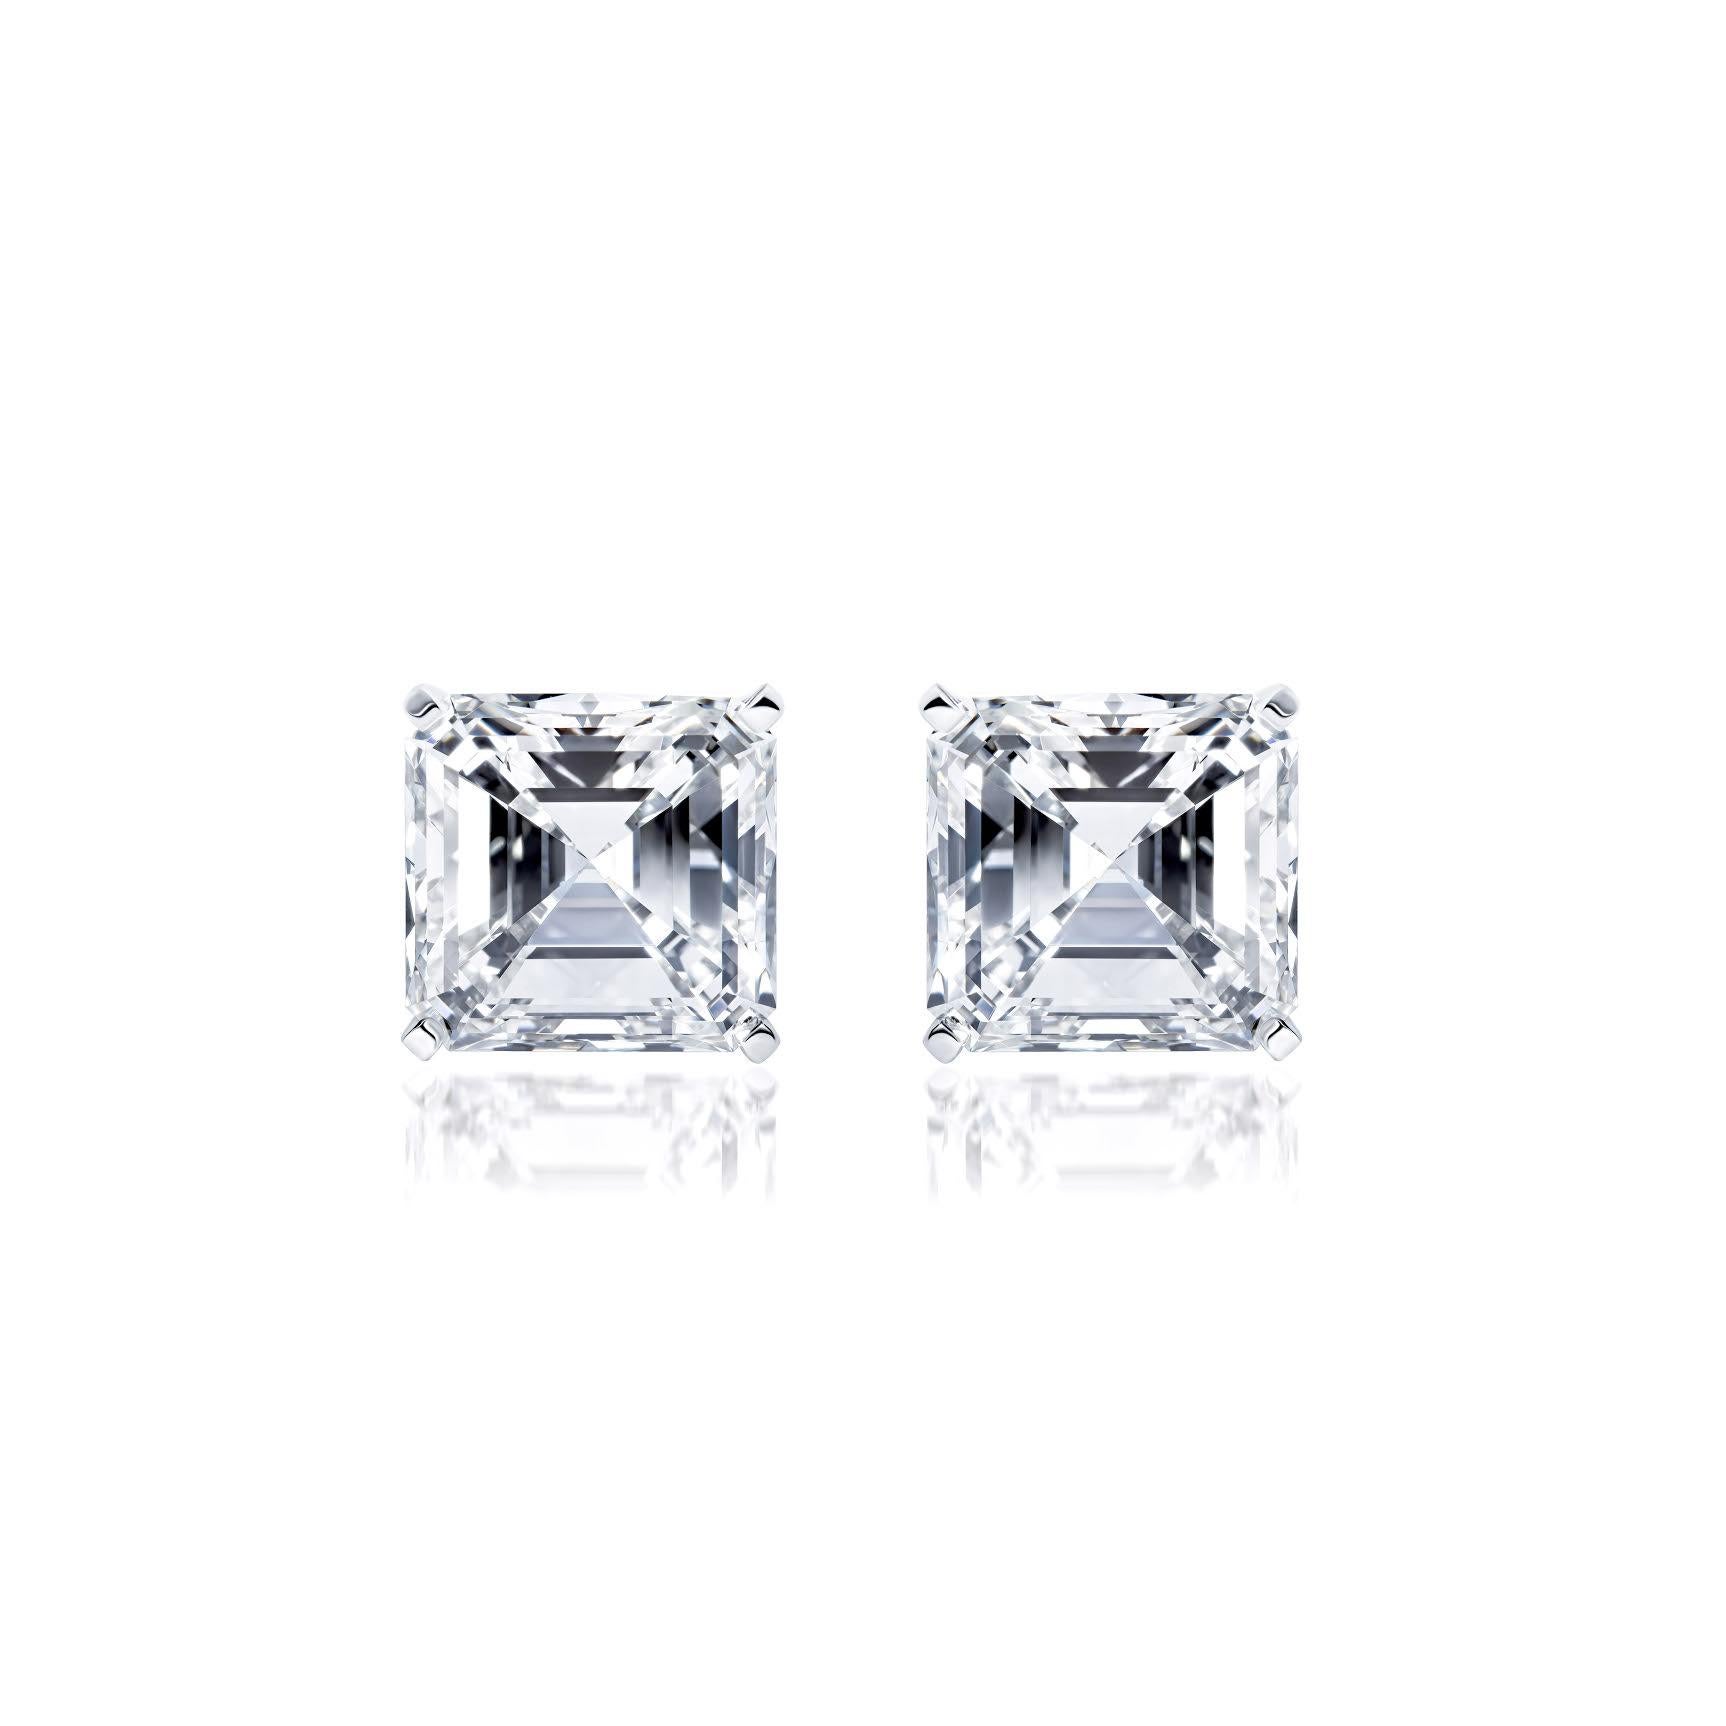 Sophisticated elegance with an edge.
These extraordinary gems weight in at over 5 1/2 carats each! for a total combined  carat weight of 11.18.  
Asccher cut diamonds of this quality are rare, a perfectly matched pair of this size is truly a